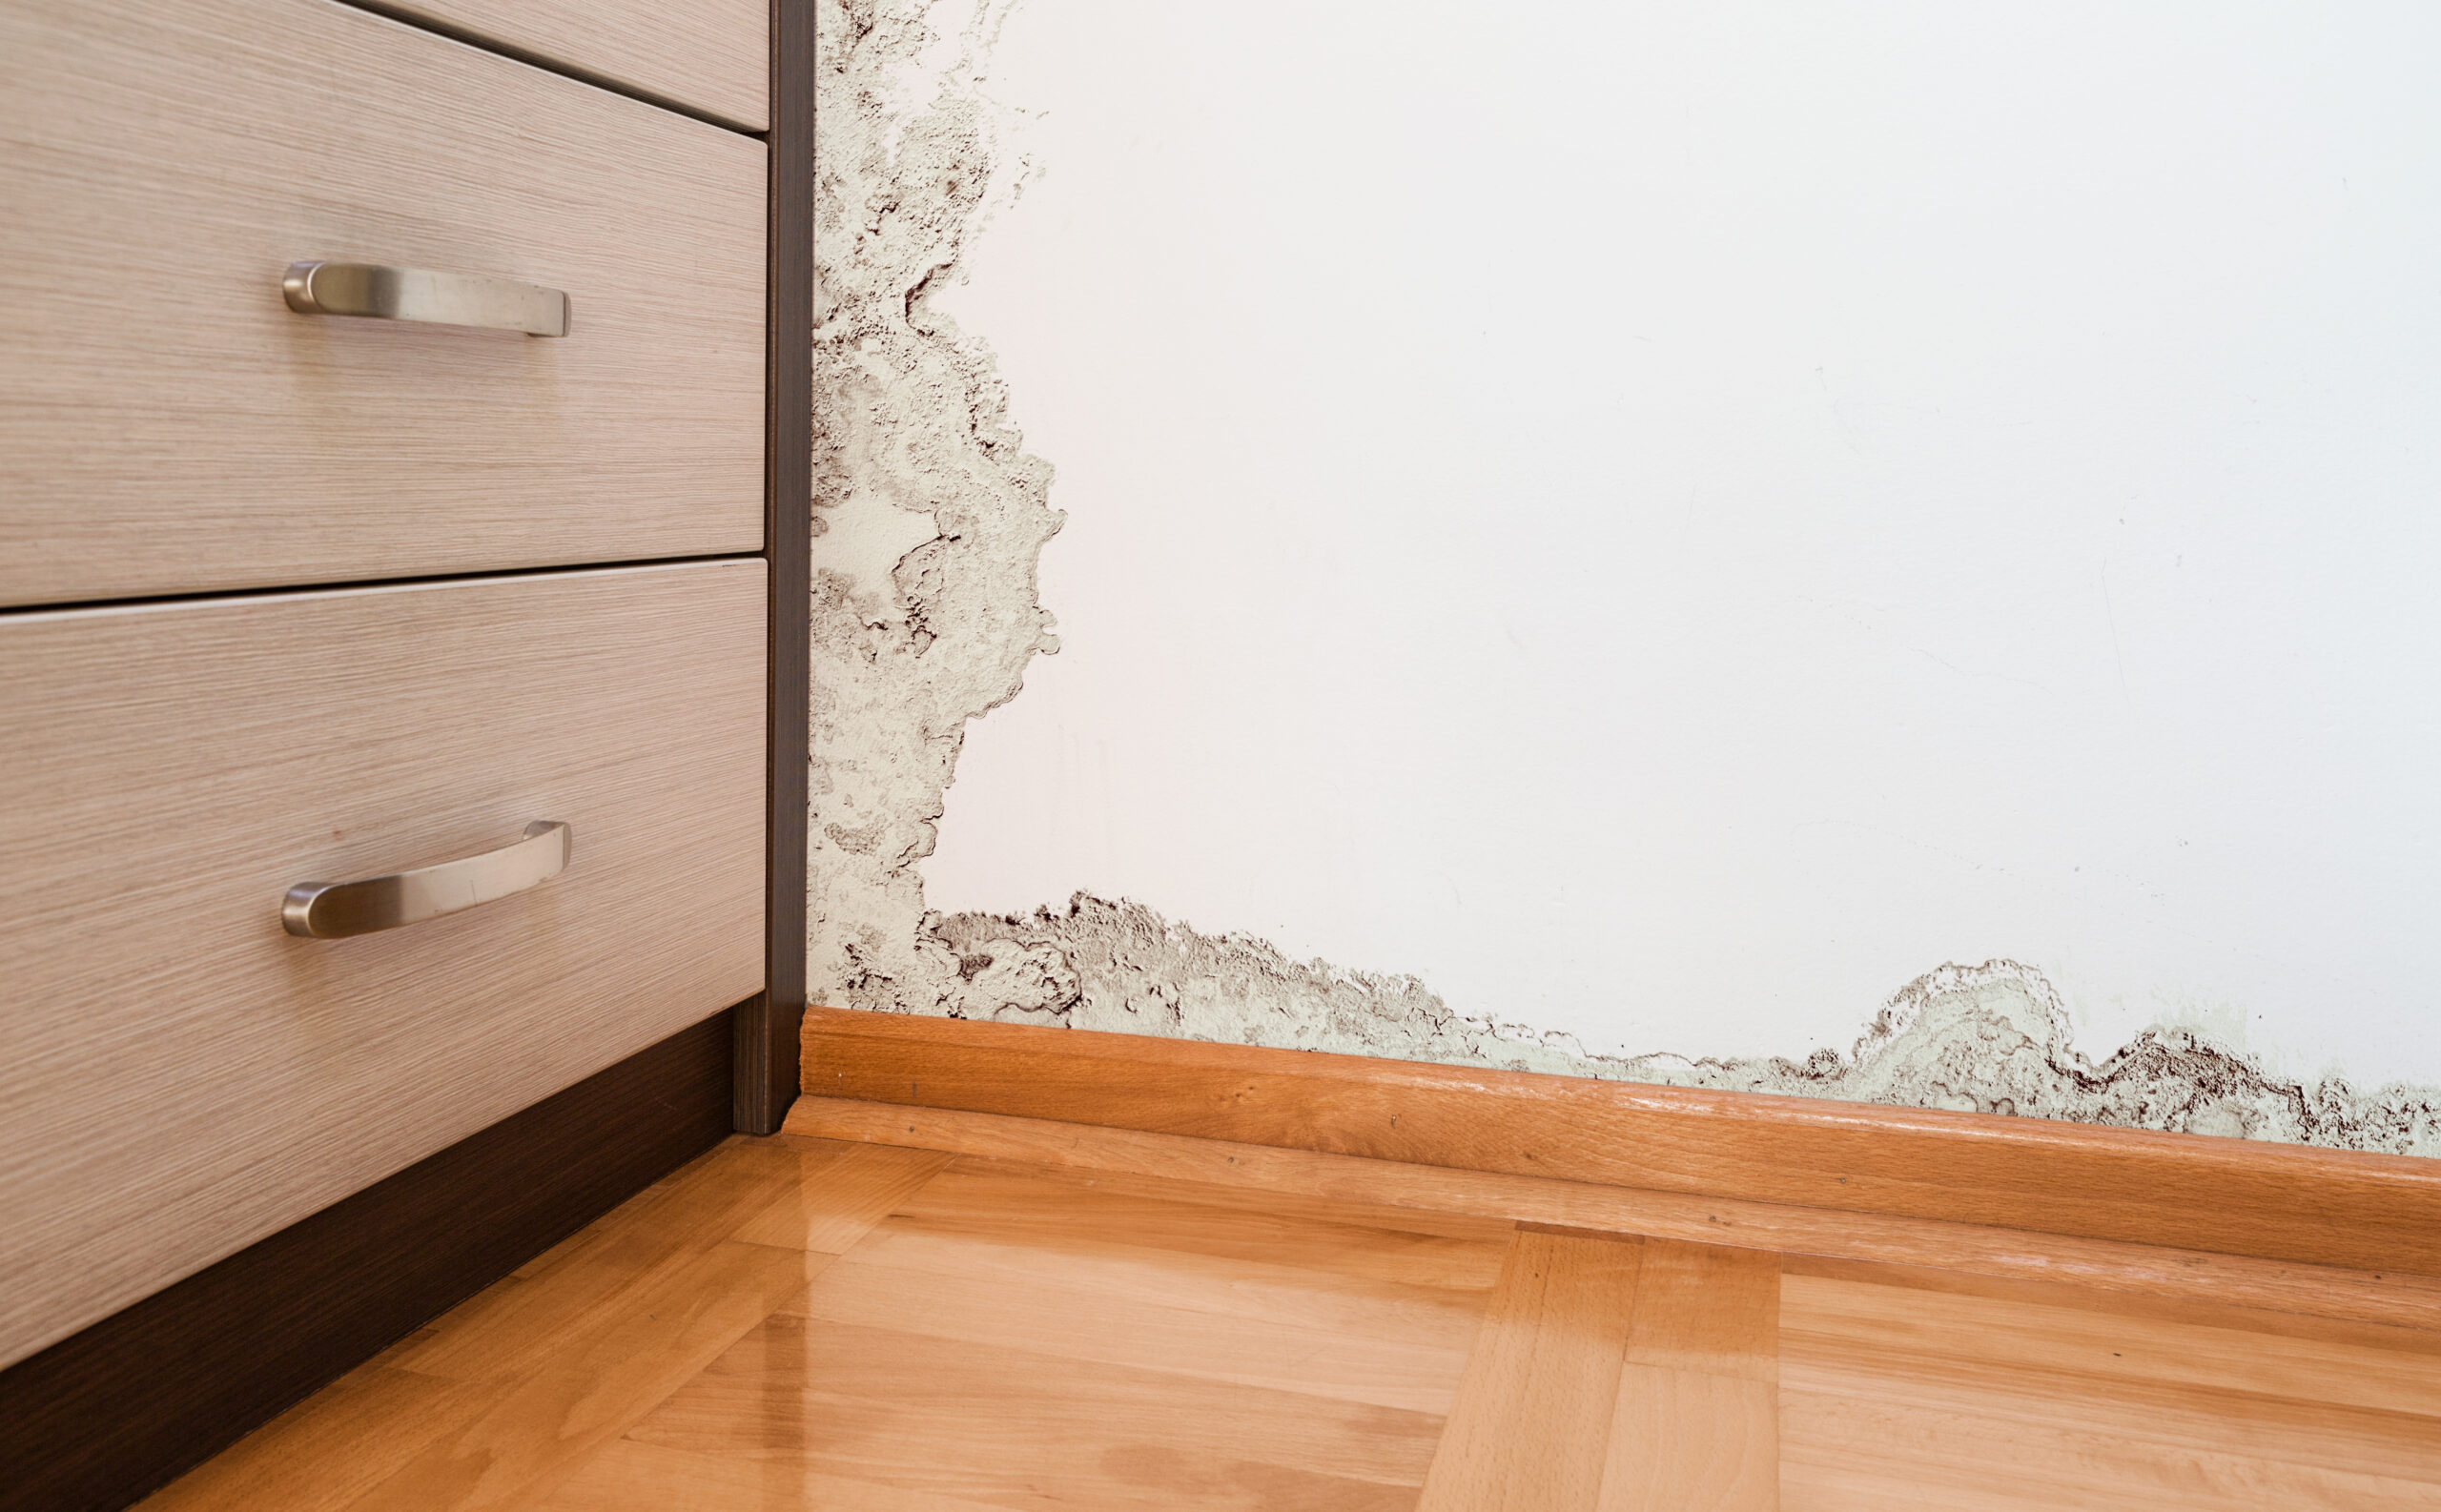 How Long Does It Take for Mold Development from Water Damage?